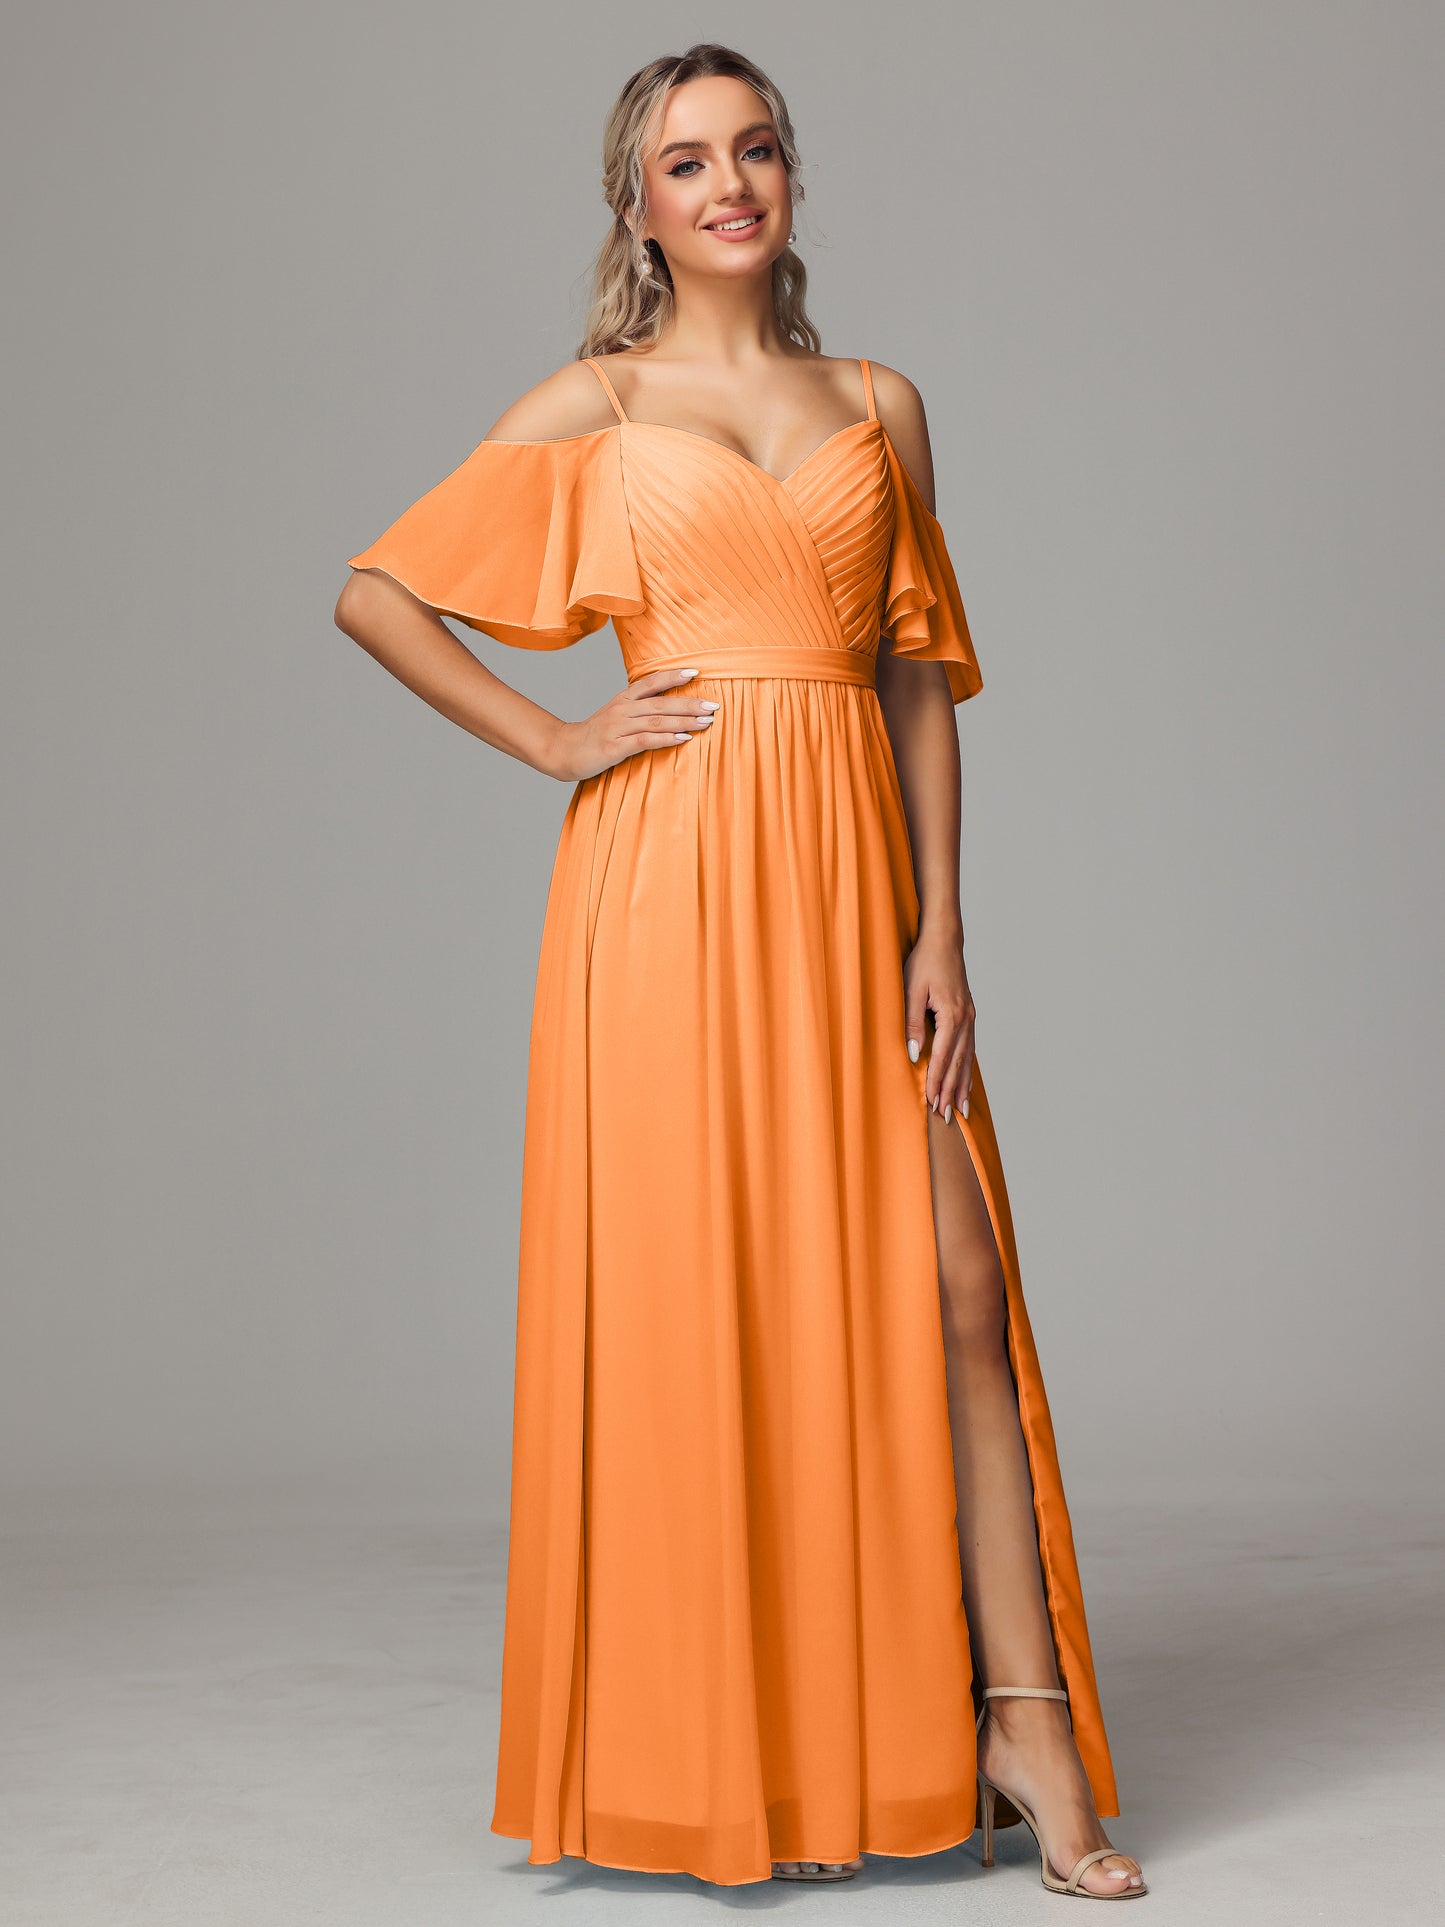 Off The Shoulder A Line Chiffon Bridesmaid Dress With Slit